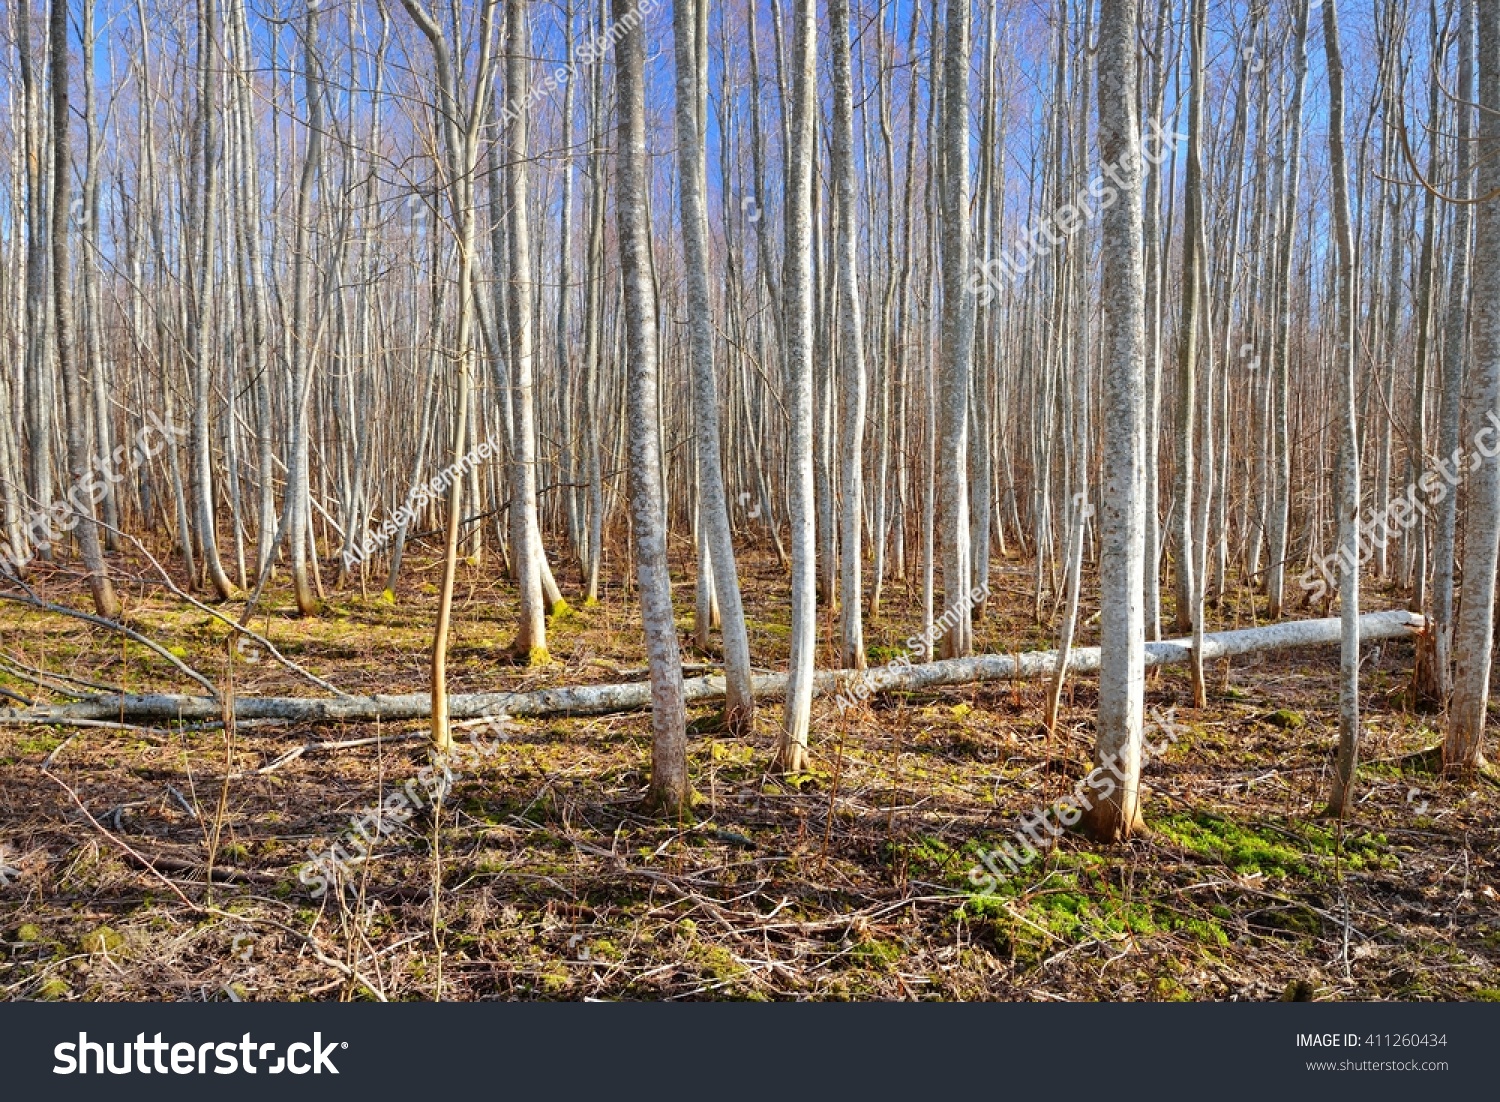 Aspen forest in the early spring in Estonia #411260434